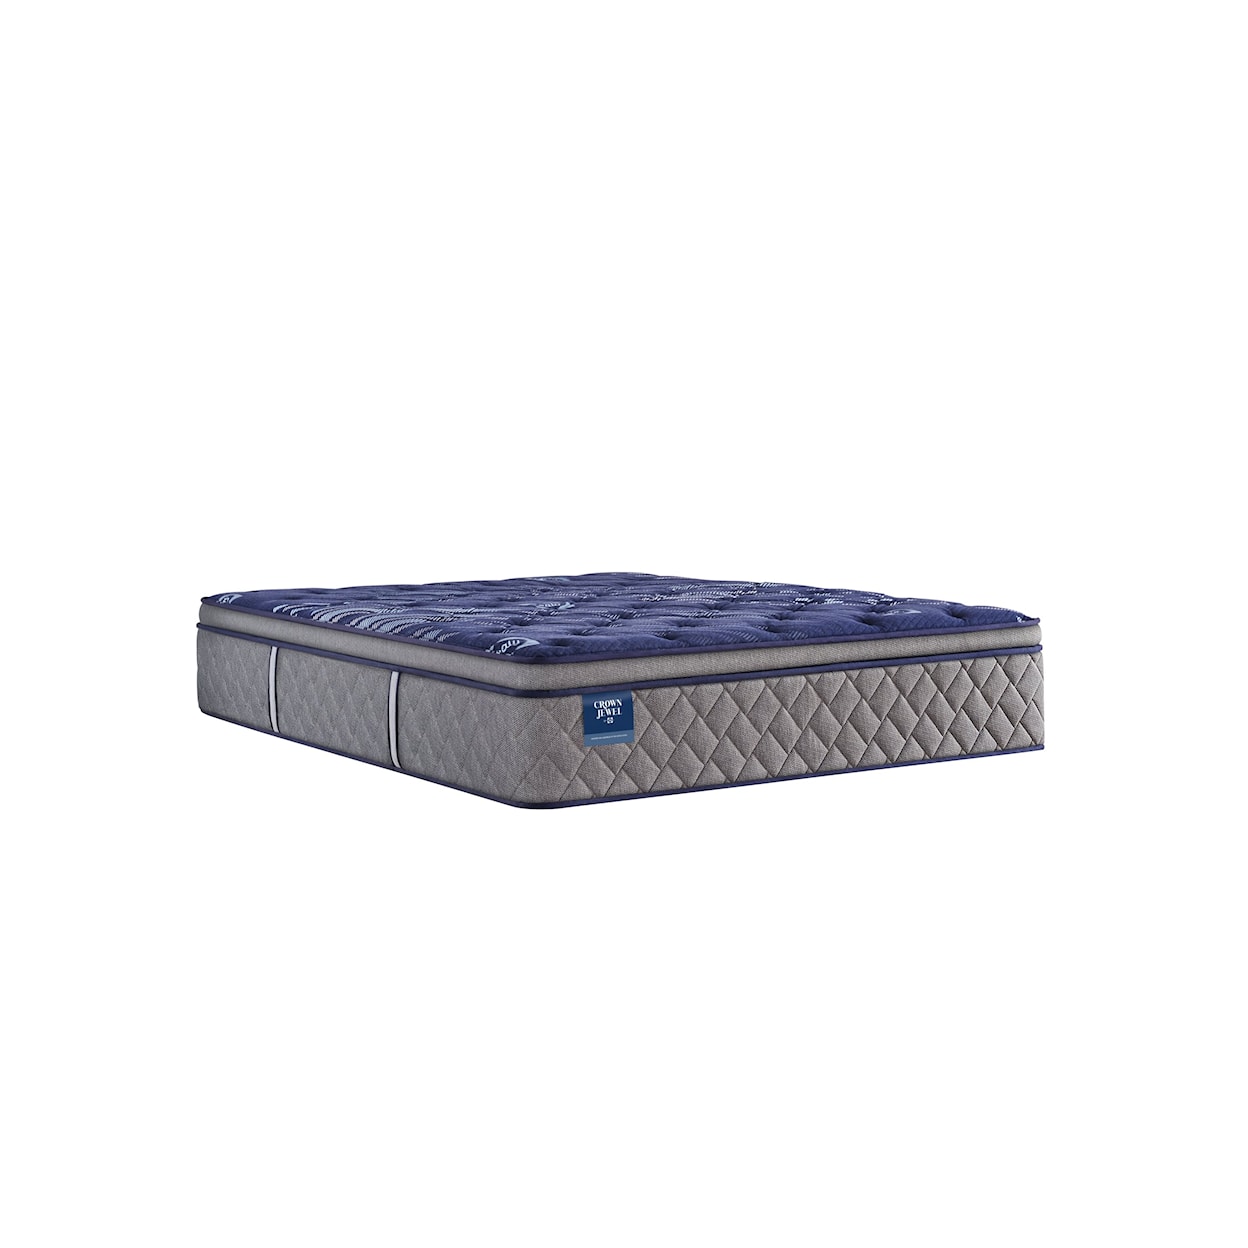 Sealy Crown Jewel S8 Eighth & Park  Soft EPT King Mattress